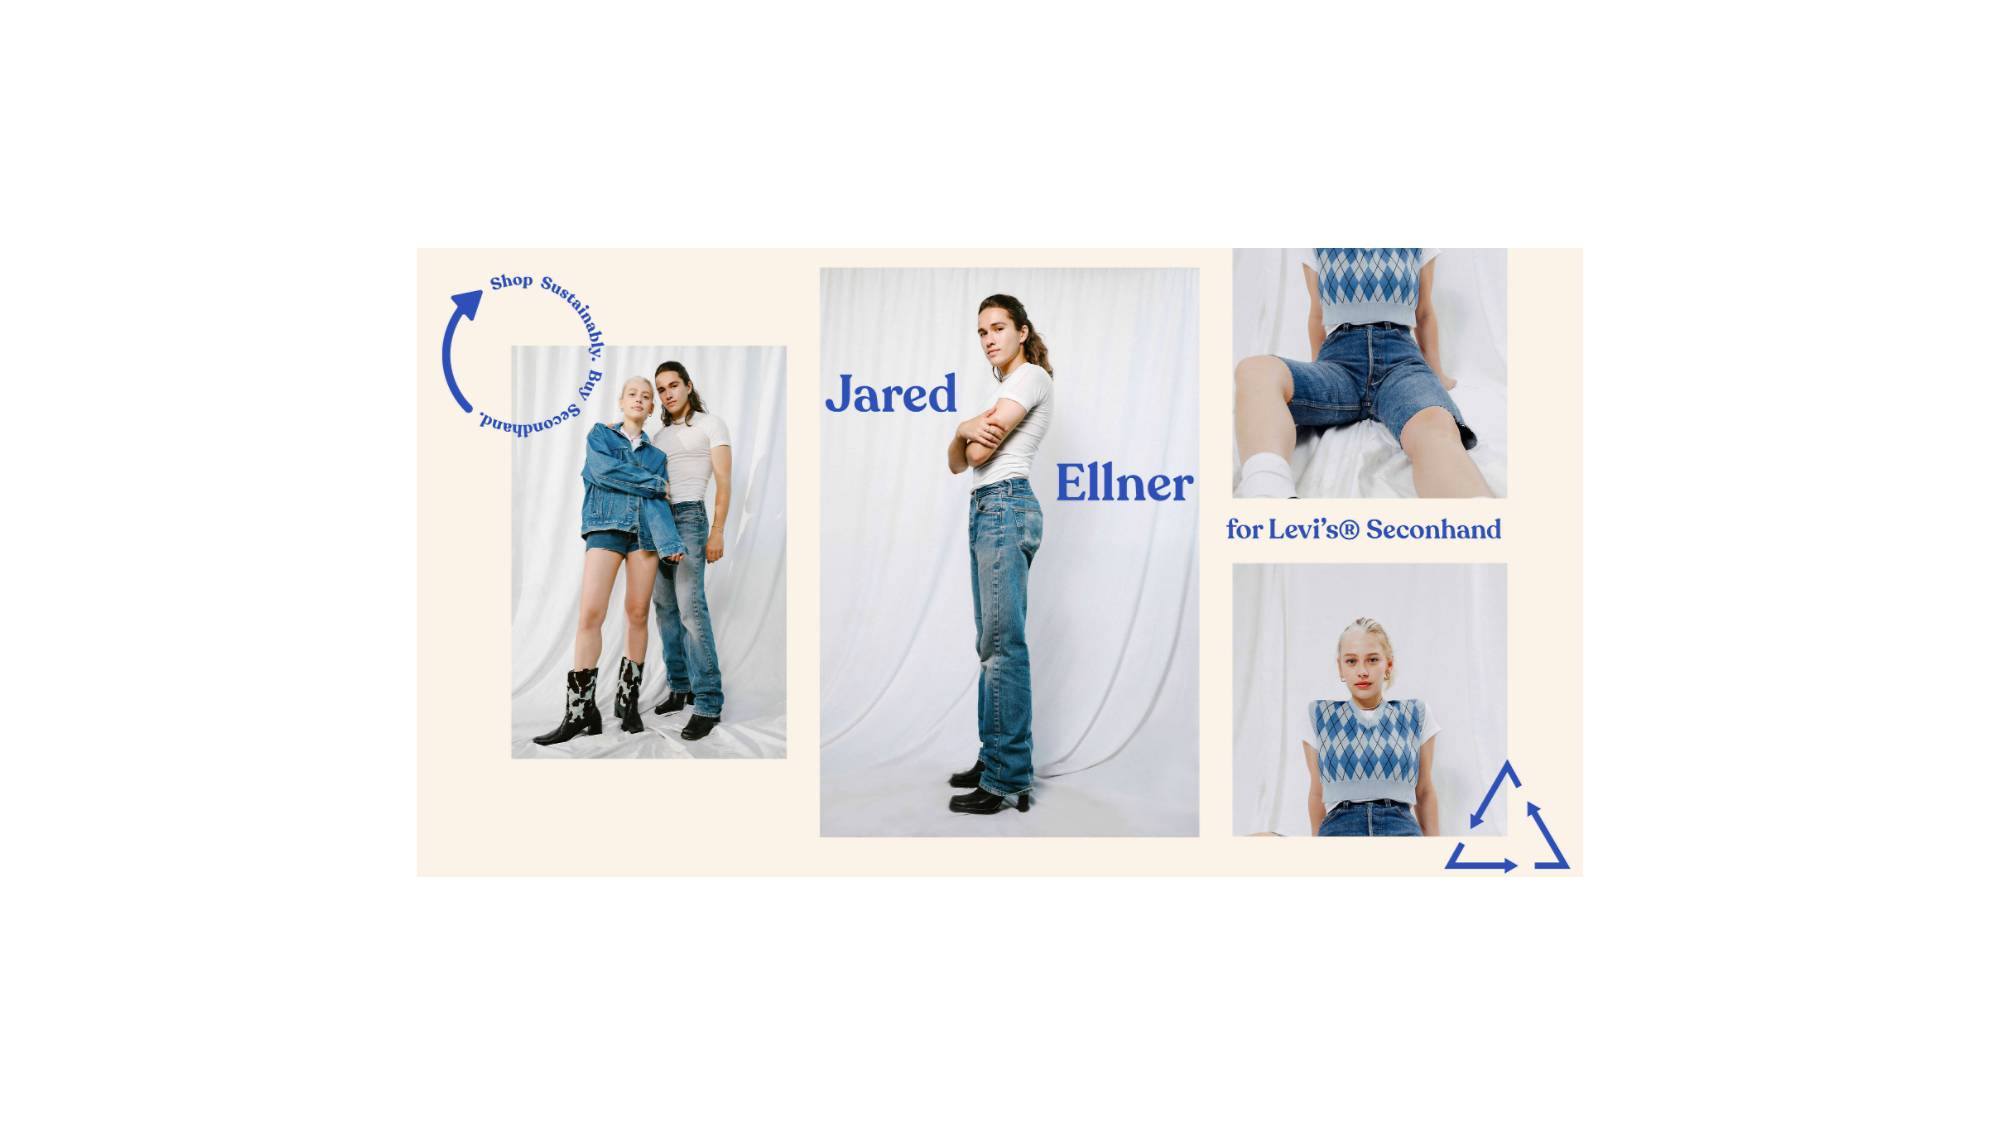 Here's What to Expect During Levi's 501 Day 2021 - FASHION Magazine